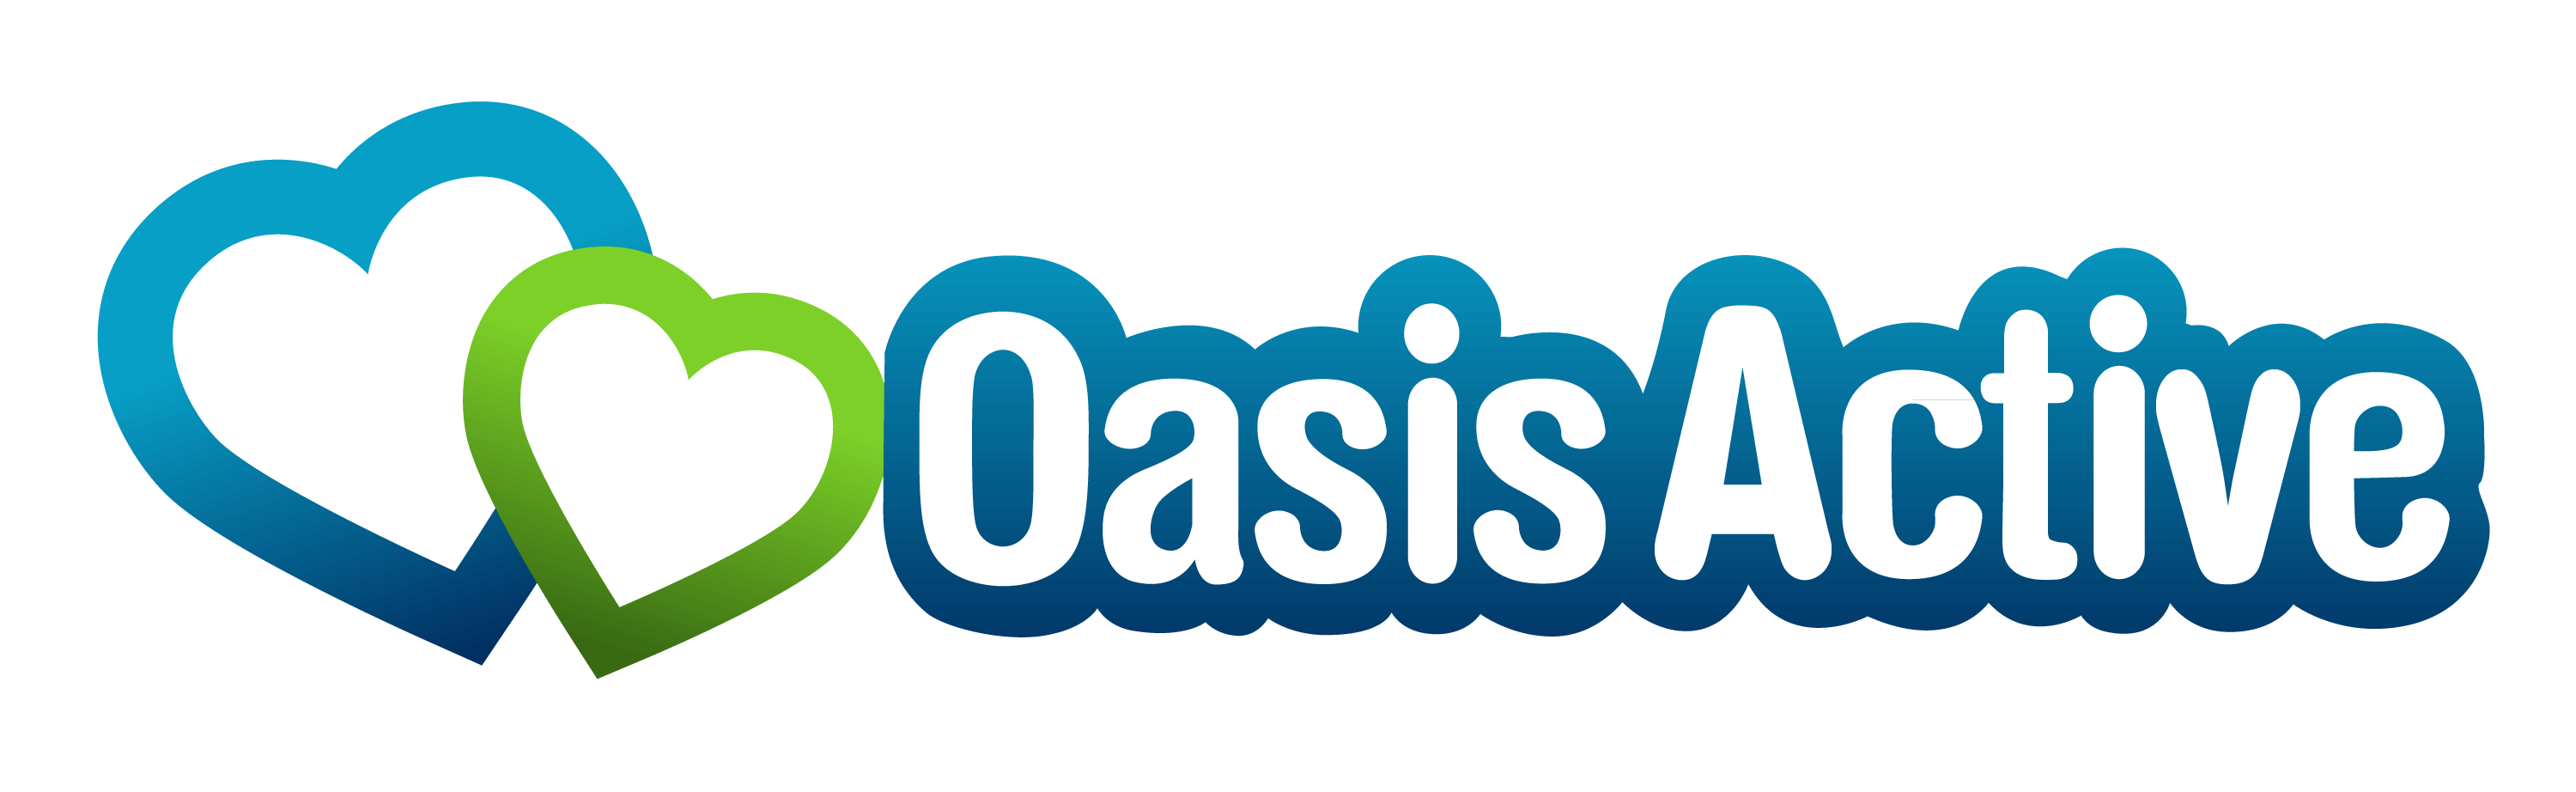 Oasis dating service